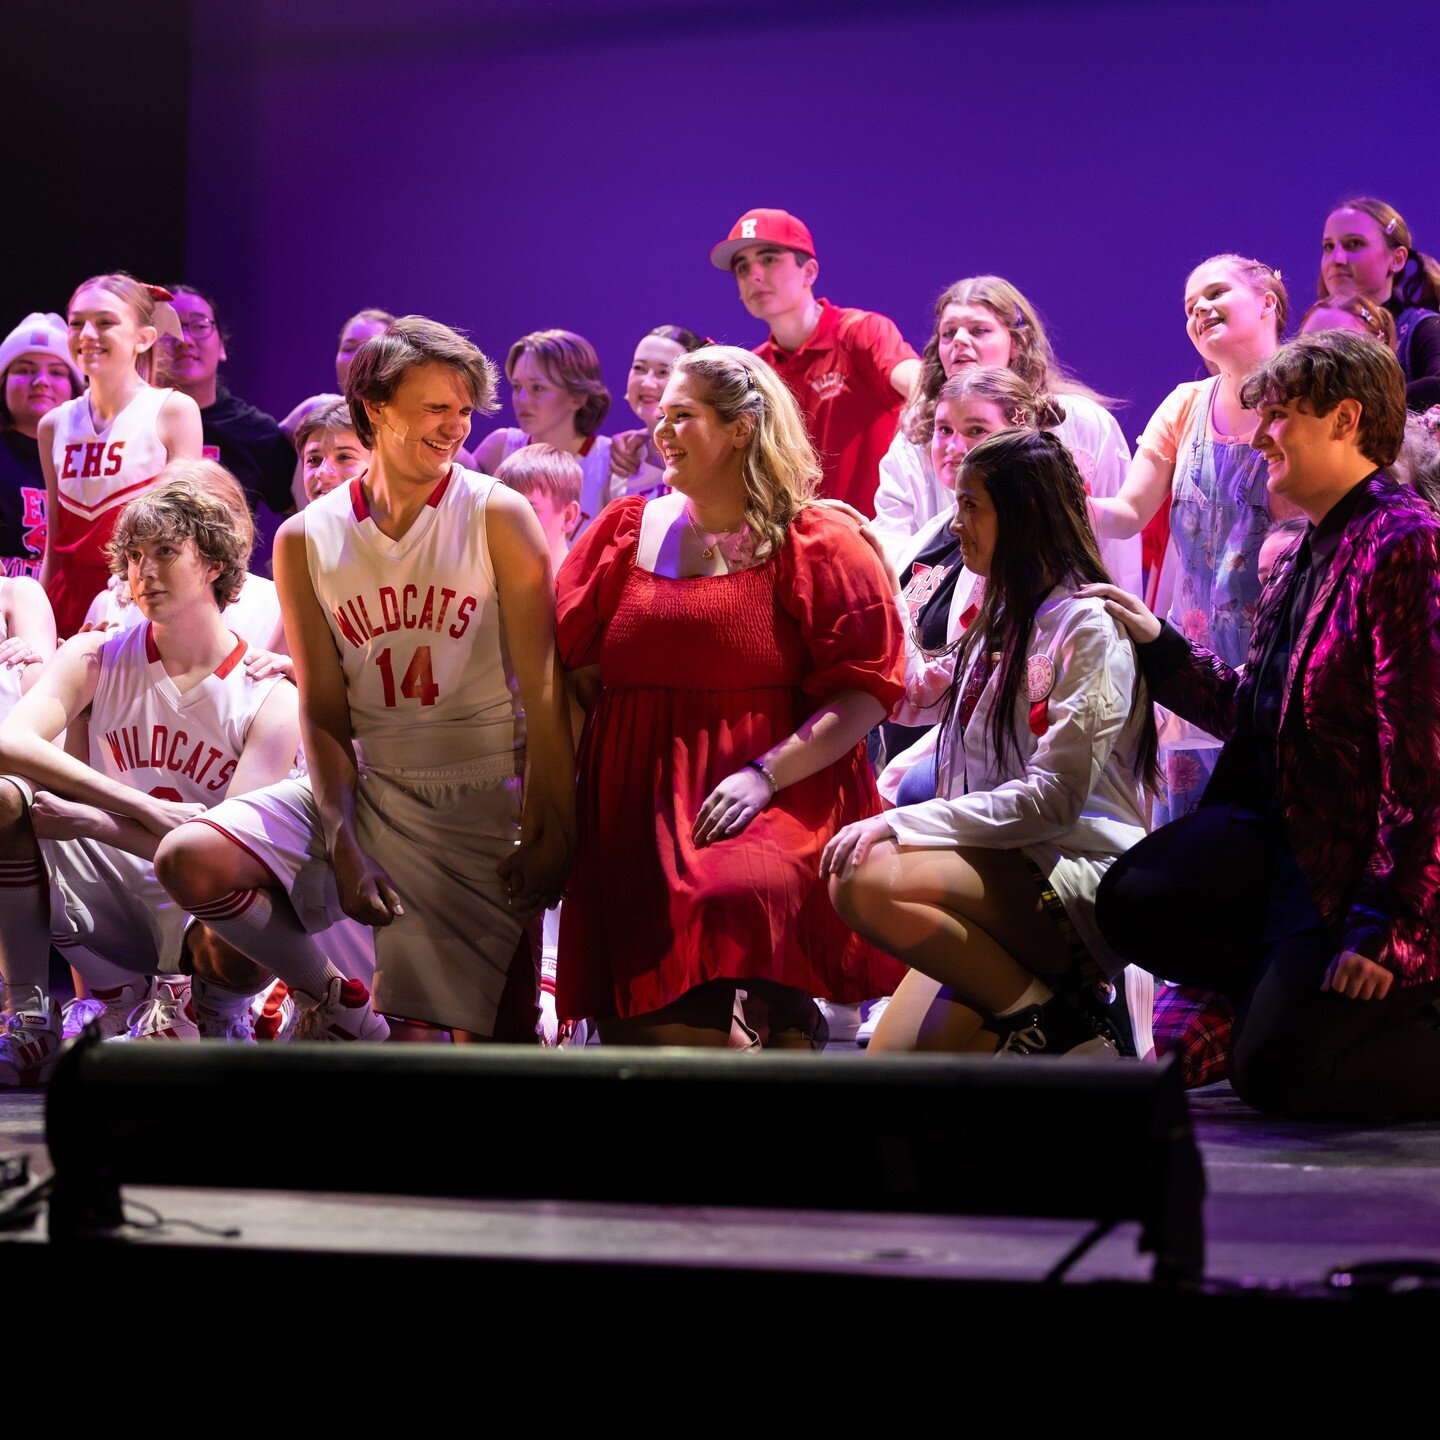 In just an hour Disney's High School Musical On Stage will open at the Brighton Center for the Performing Arts We hope everyone that attends opening night enjoys the show.
If you aren't coming tonight, we have 6 additional performances. Go to Brighto